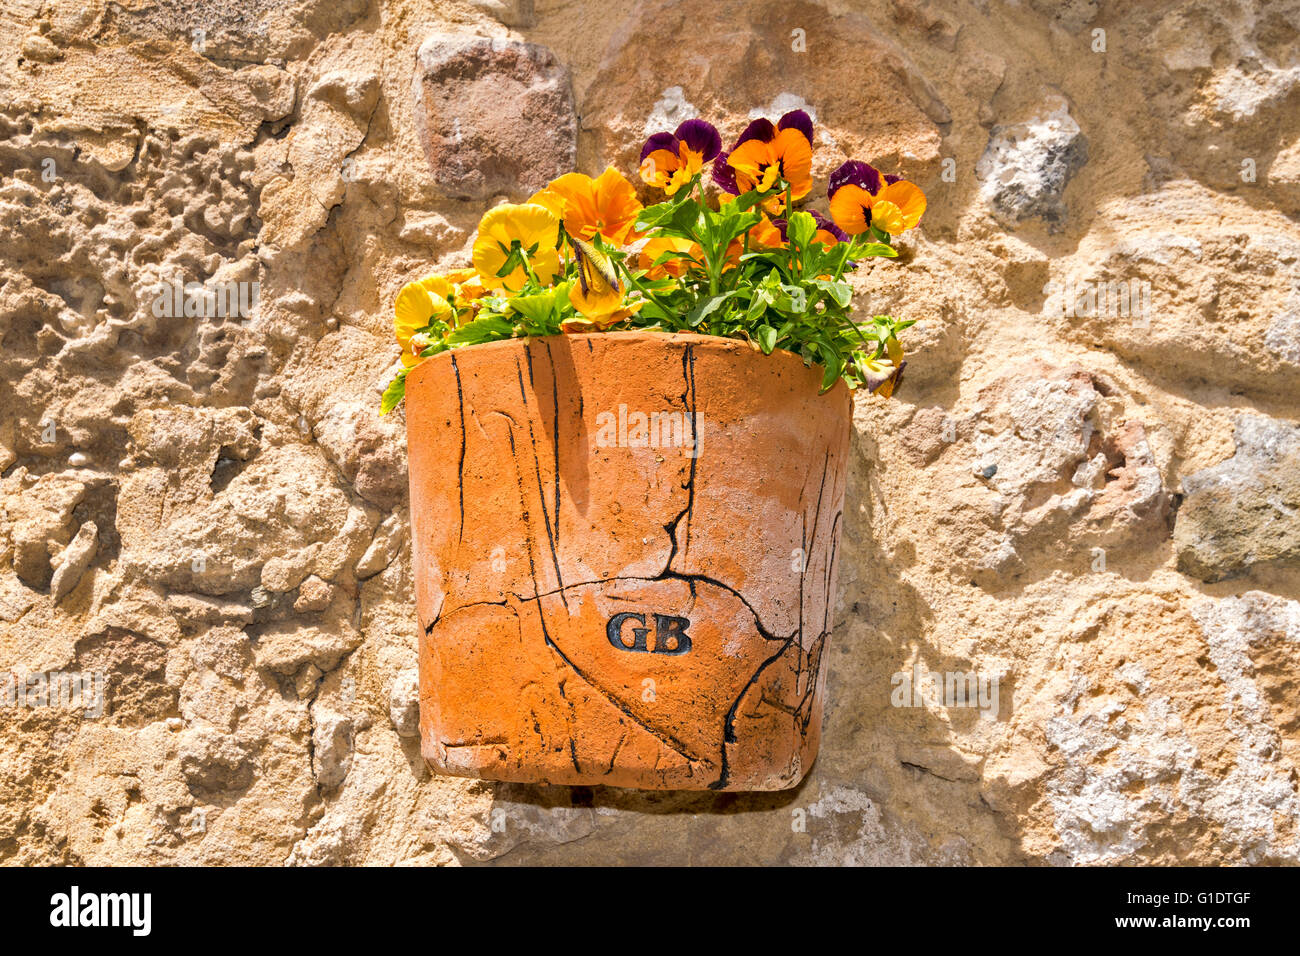 NORTH CYPRUS KYRENIA OLD TOWN TERRACOTTA POT ON AN OLD STONE WALL FILLED WITH ORANGE PETUNIA FLOWERS Stock Photo